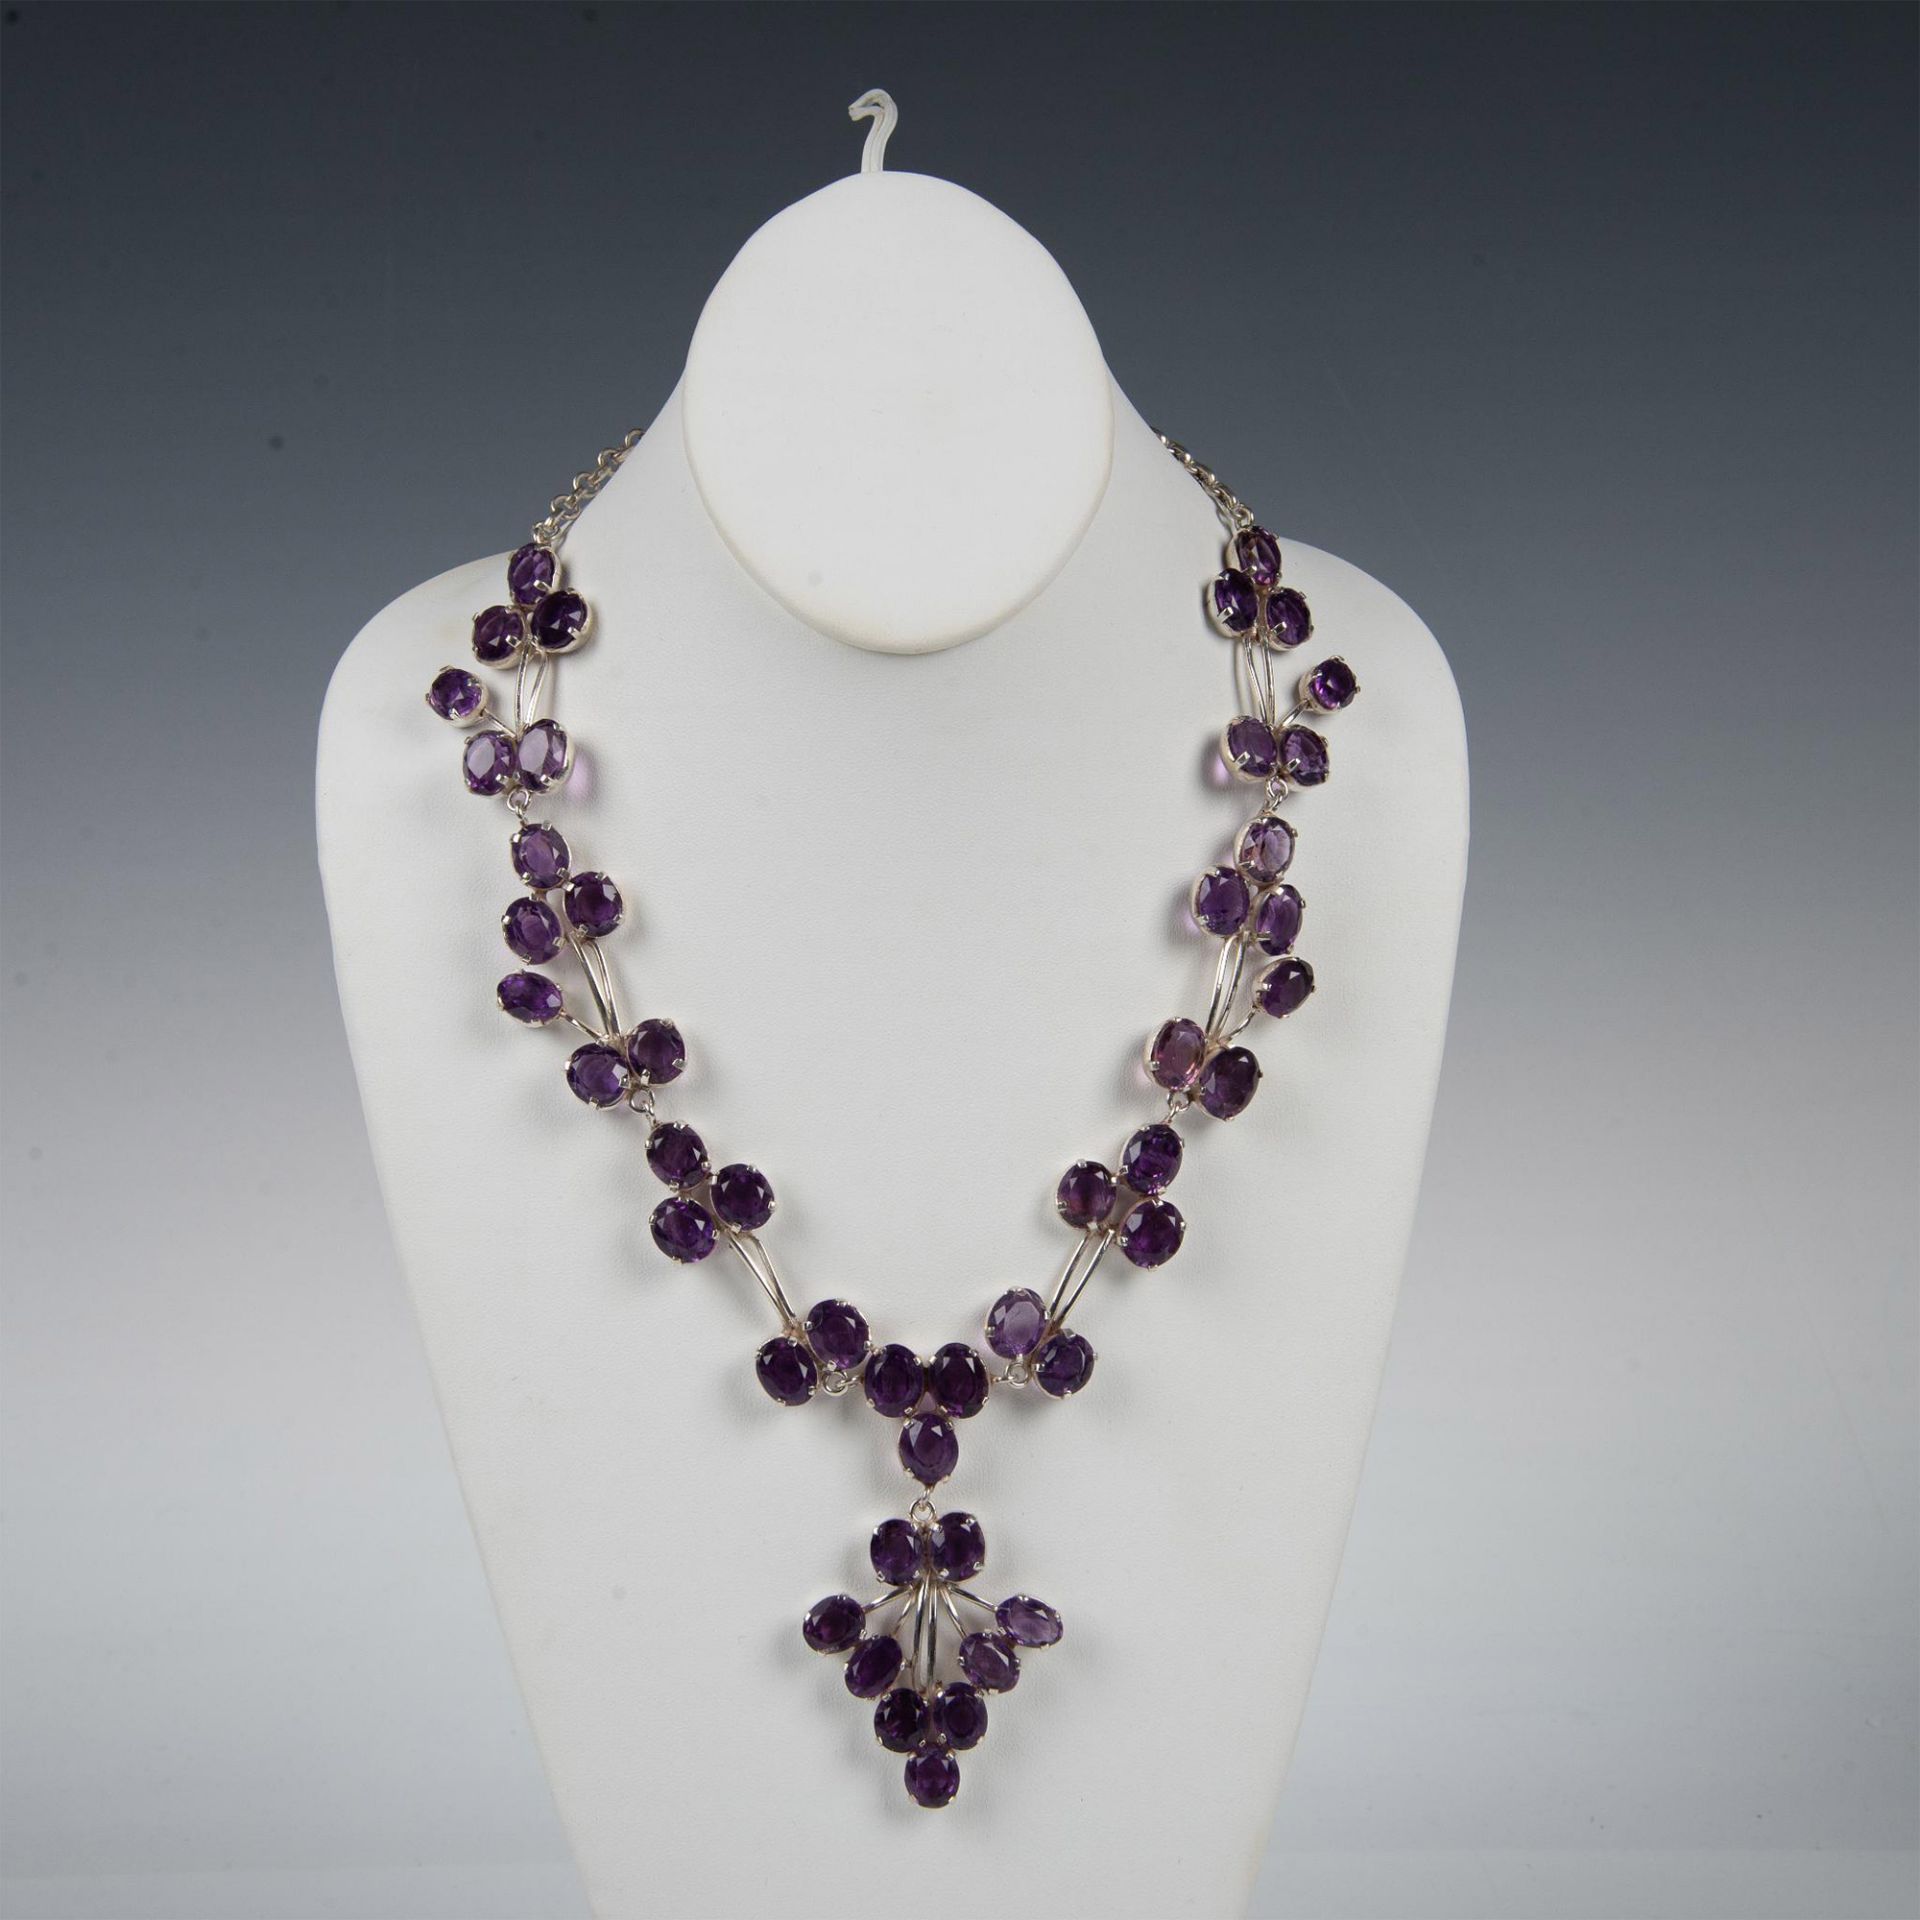 Exquisite Sterling Silver & Lab Amethyst Statement Necklace